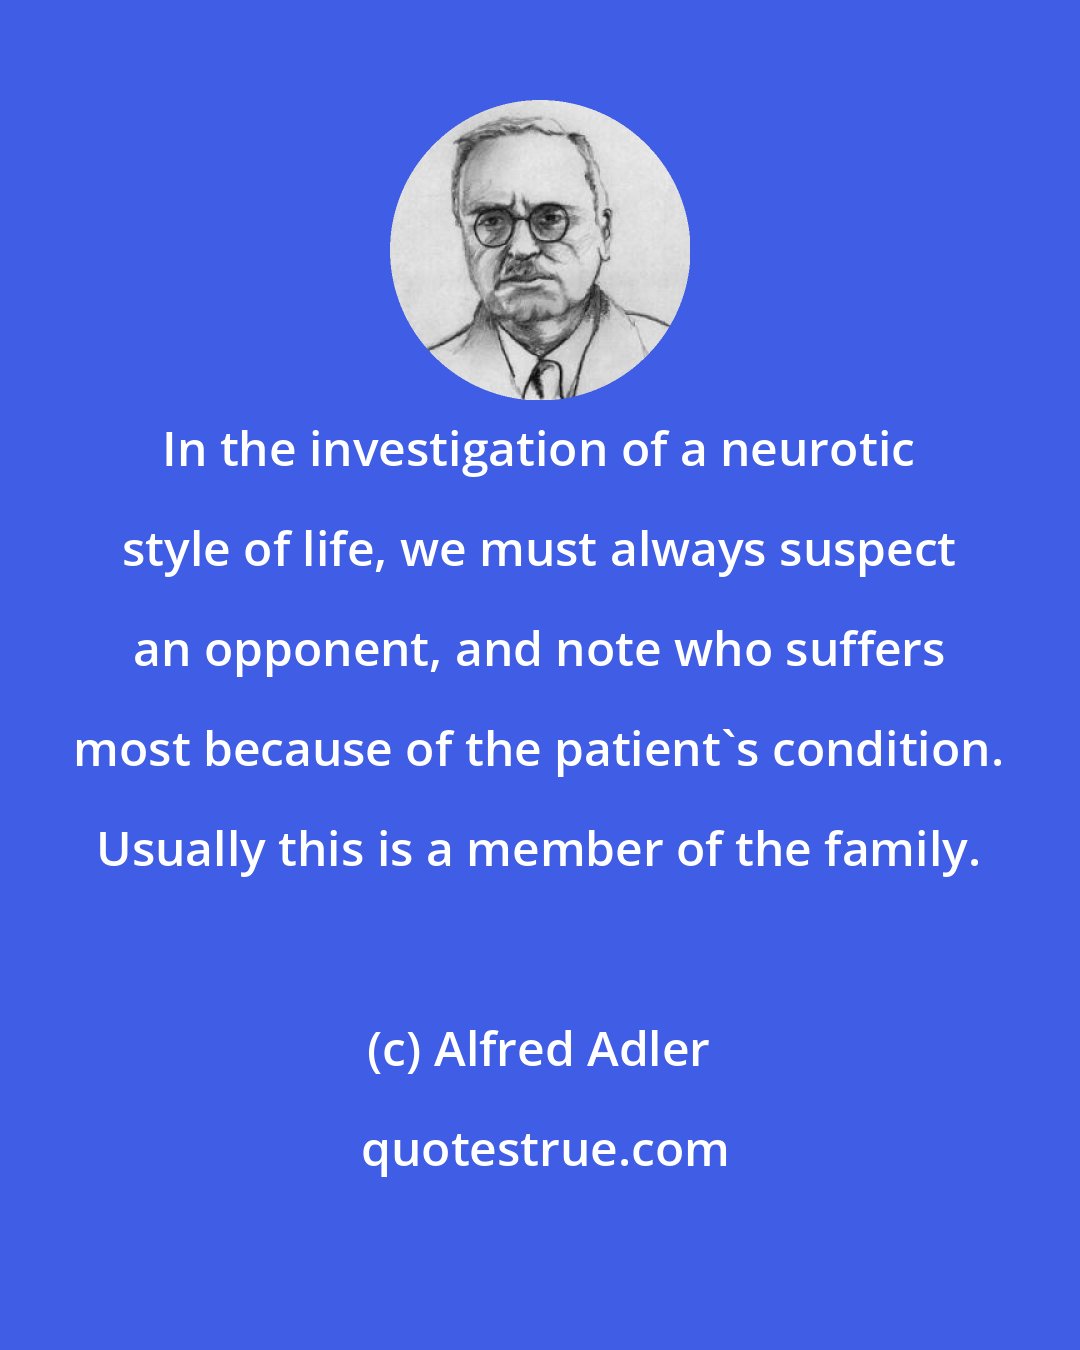 Alfred Adler: In the investigation of a neurotic style of life, we must always suspect an opponent, and note who suffers most because of the patient's condition. Usually this is a member of the family.